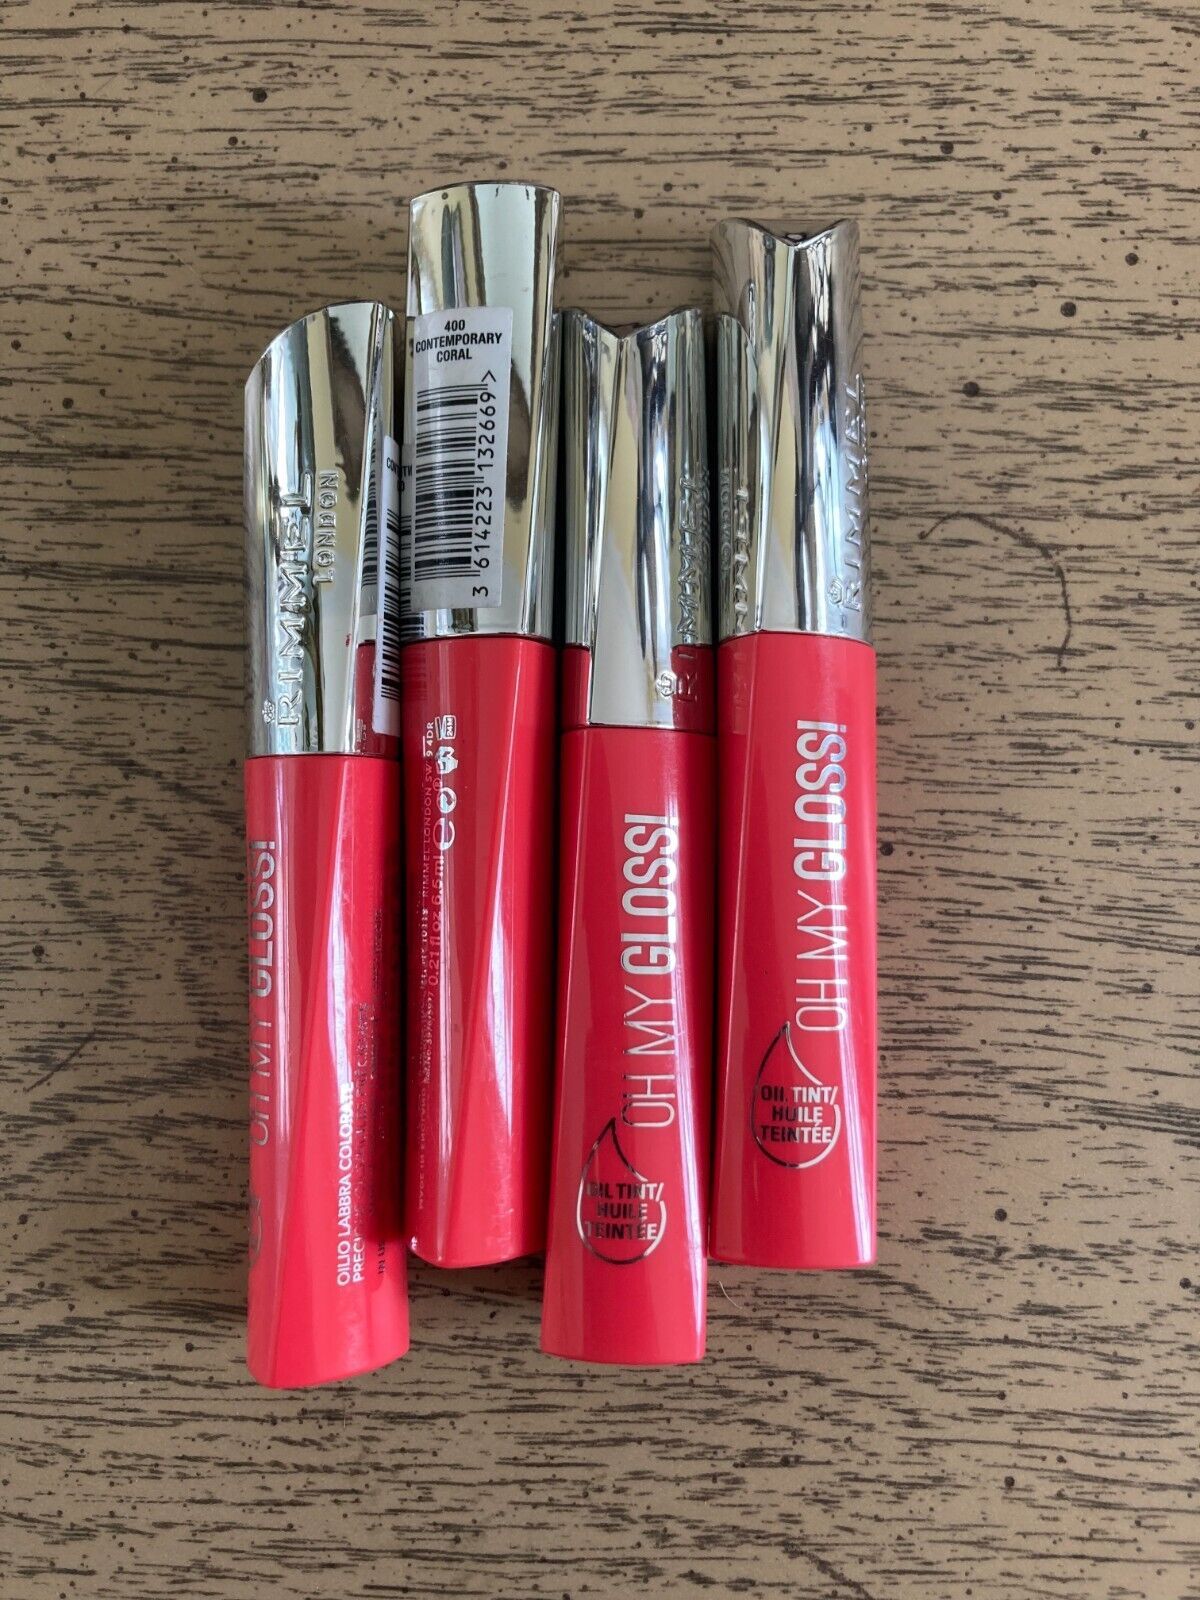 RIMMEL Oh My Gloss Lip Gloss Shade: # 400 Contemporary Coral NEW Lot of 4 - $32.33